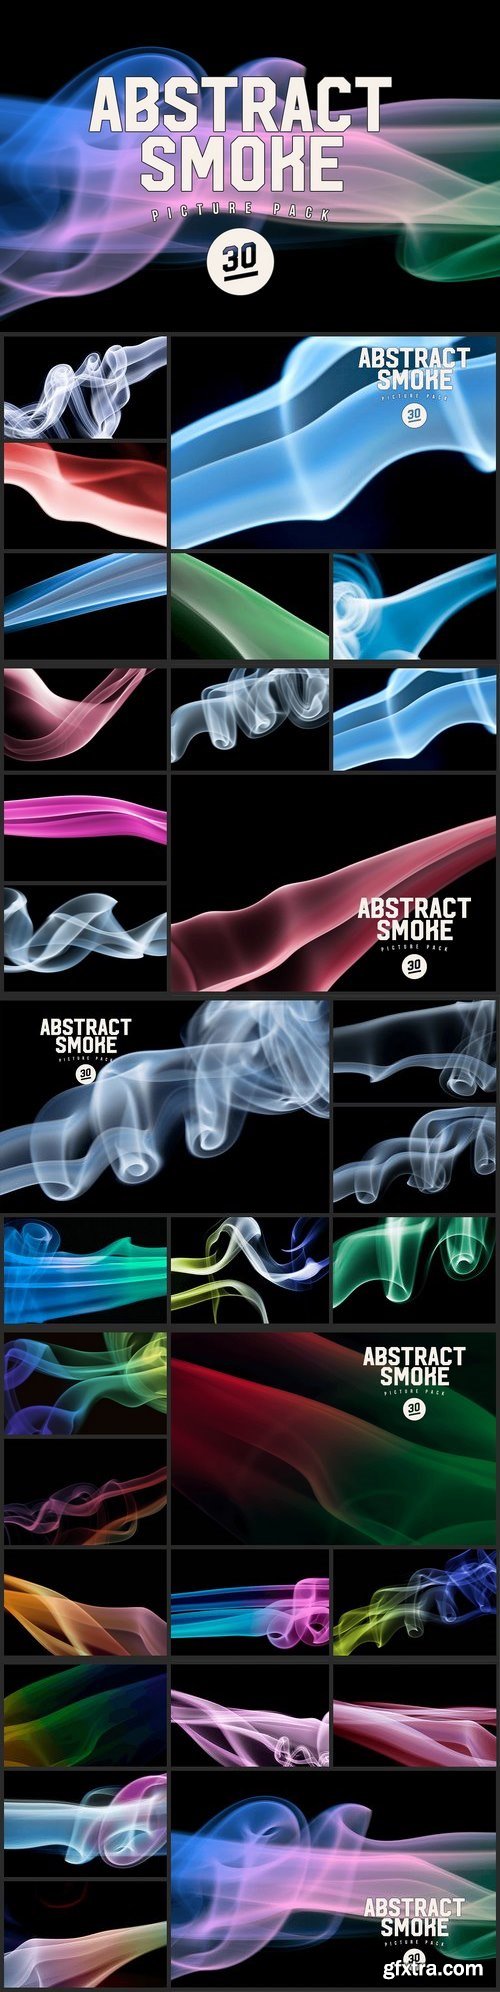 CM - Abstract Smoke Photo Pack 1376734